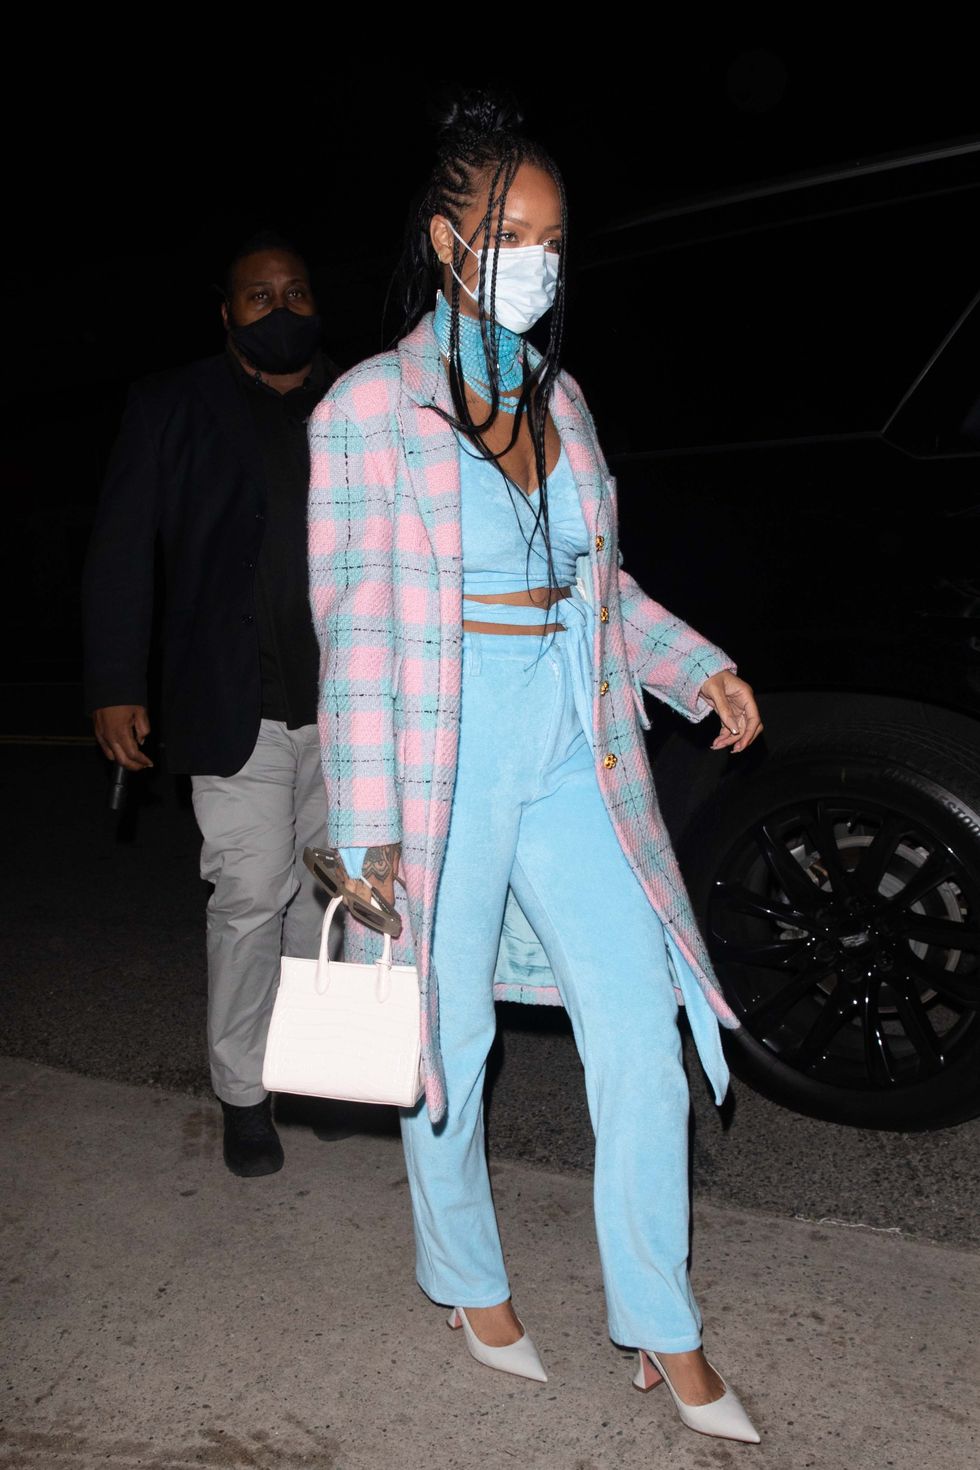 los angeles, ca   march 19  rihanna arrives at giorgio baldi on march 19, 2021 in los angeles, california photo by iamkevinwongcommegagc images